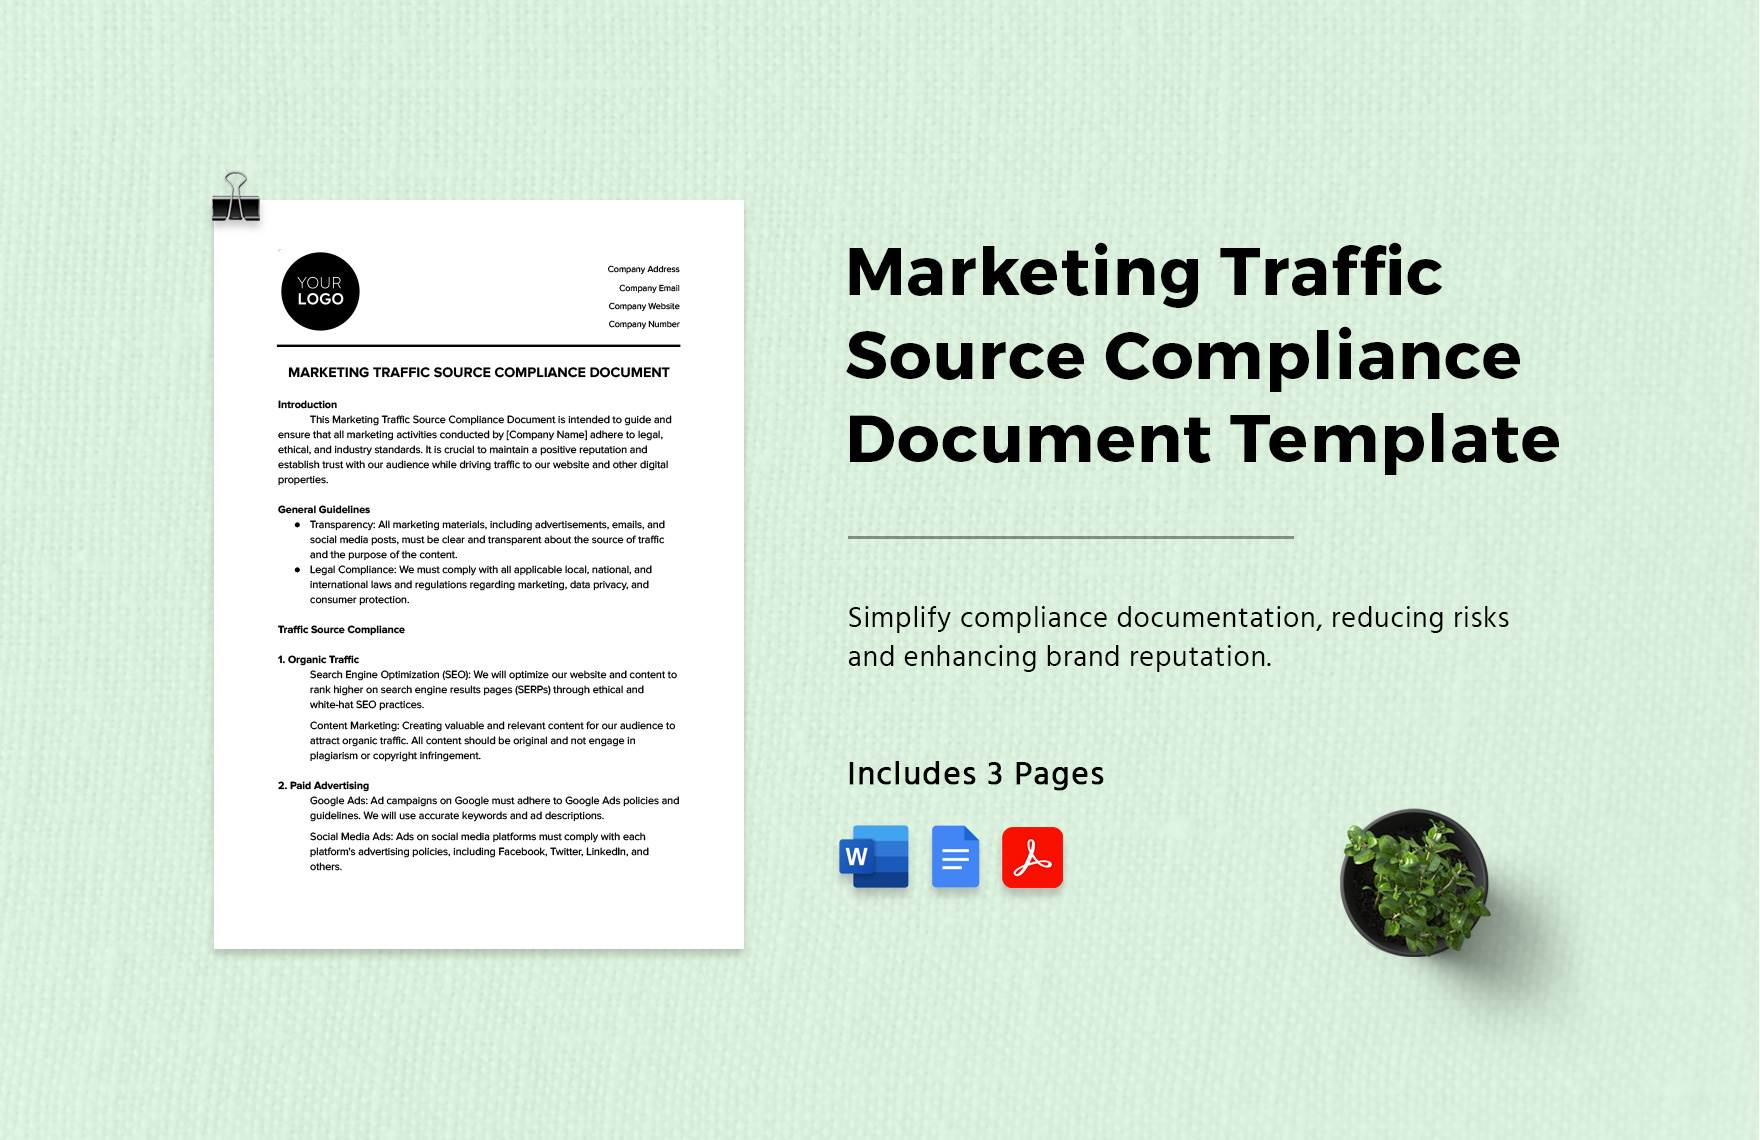 Marketing Traffic Source Compliance Document Template in Word, Google Docs, PDF